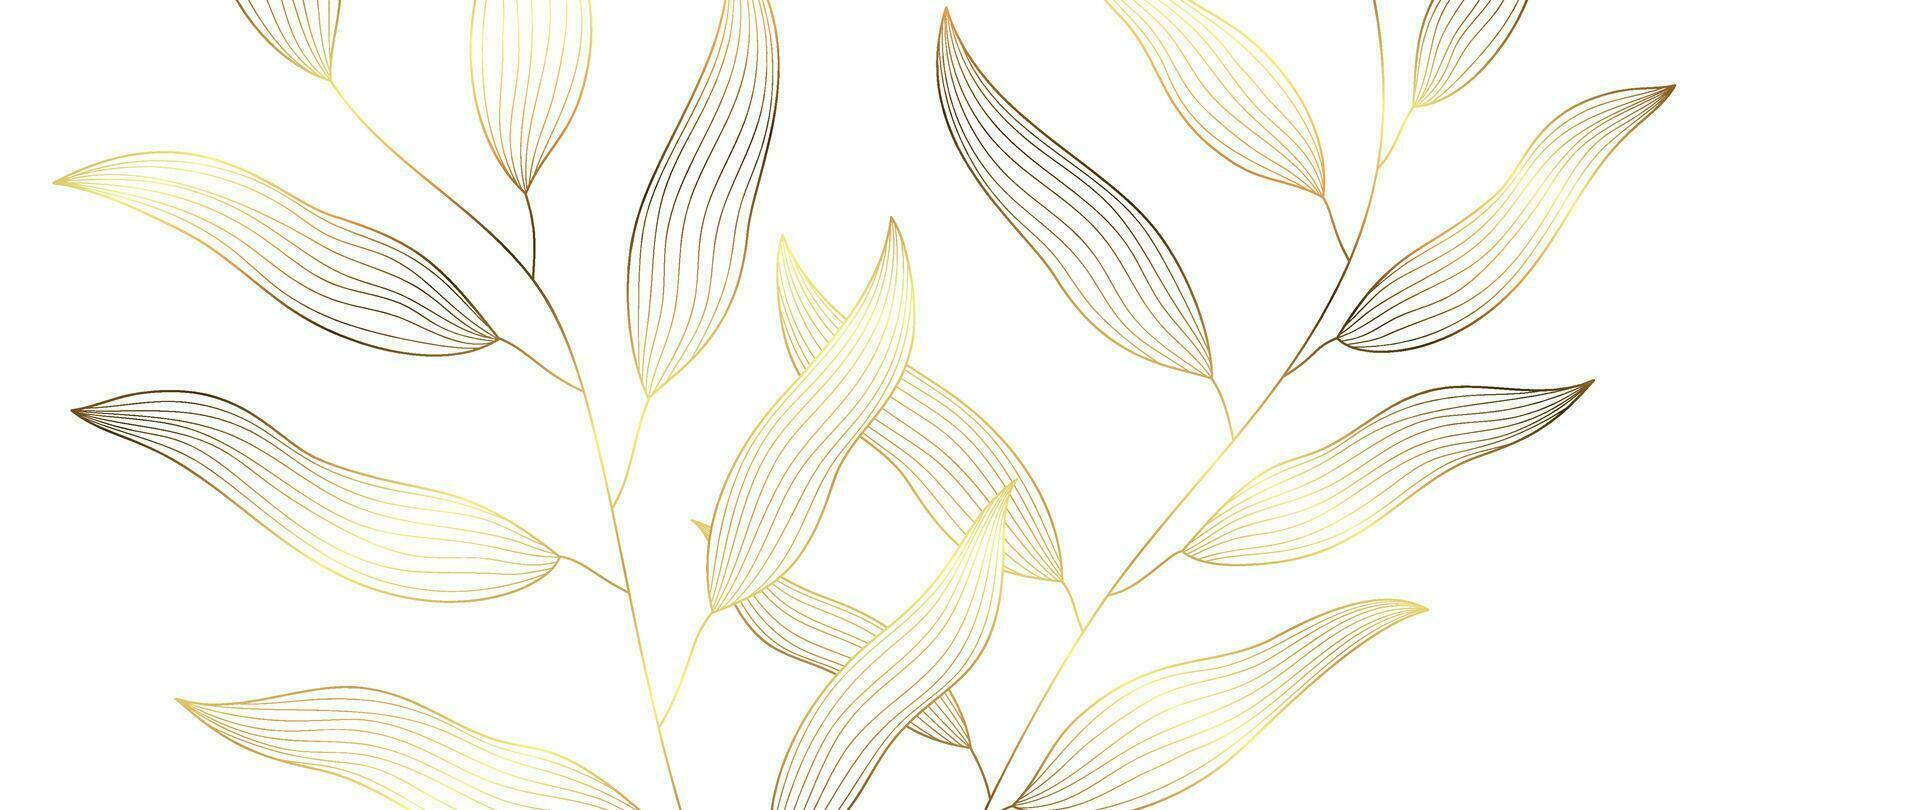 Botanical leaf line art wallpaper background vector. Luxury natural hand drawn foliage pattern design in minimalist linear contour simple style. Design for fabric, print, cover, banner, invitation. vector